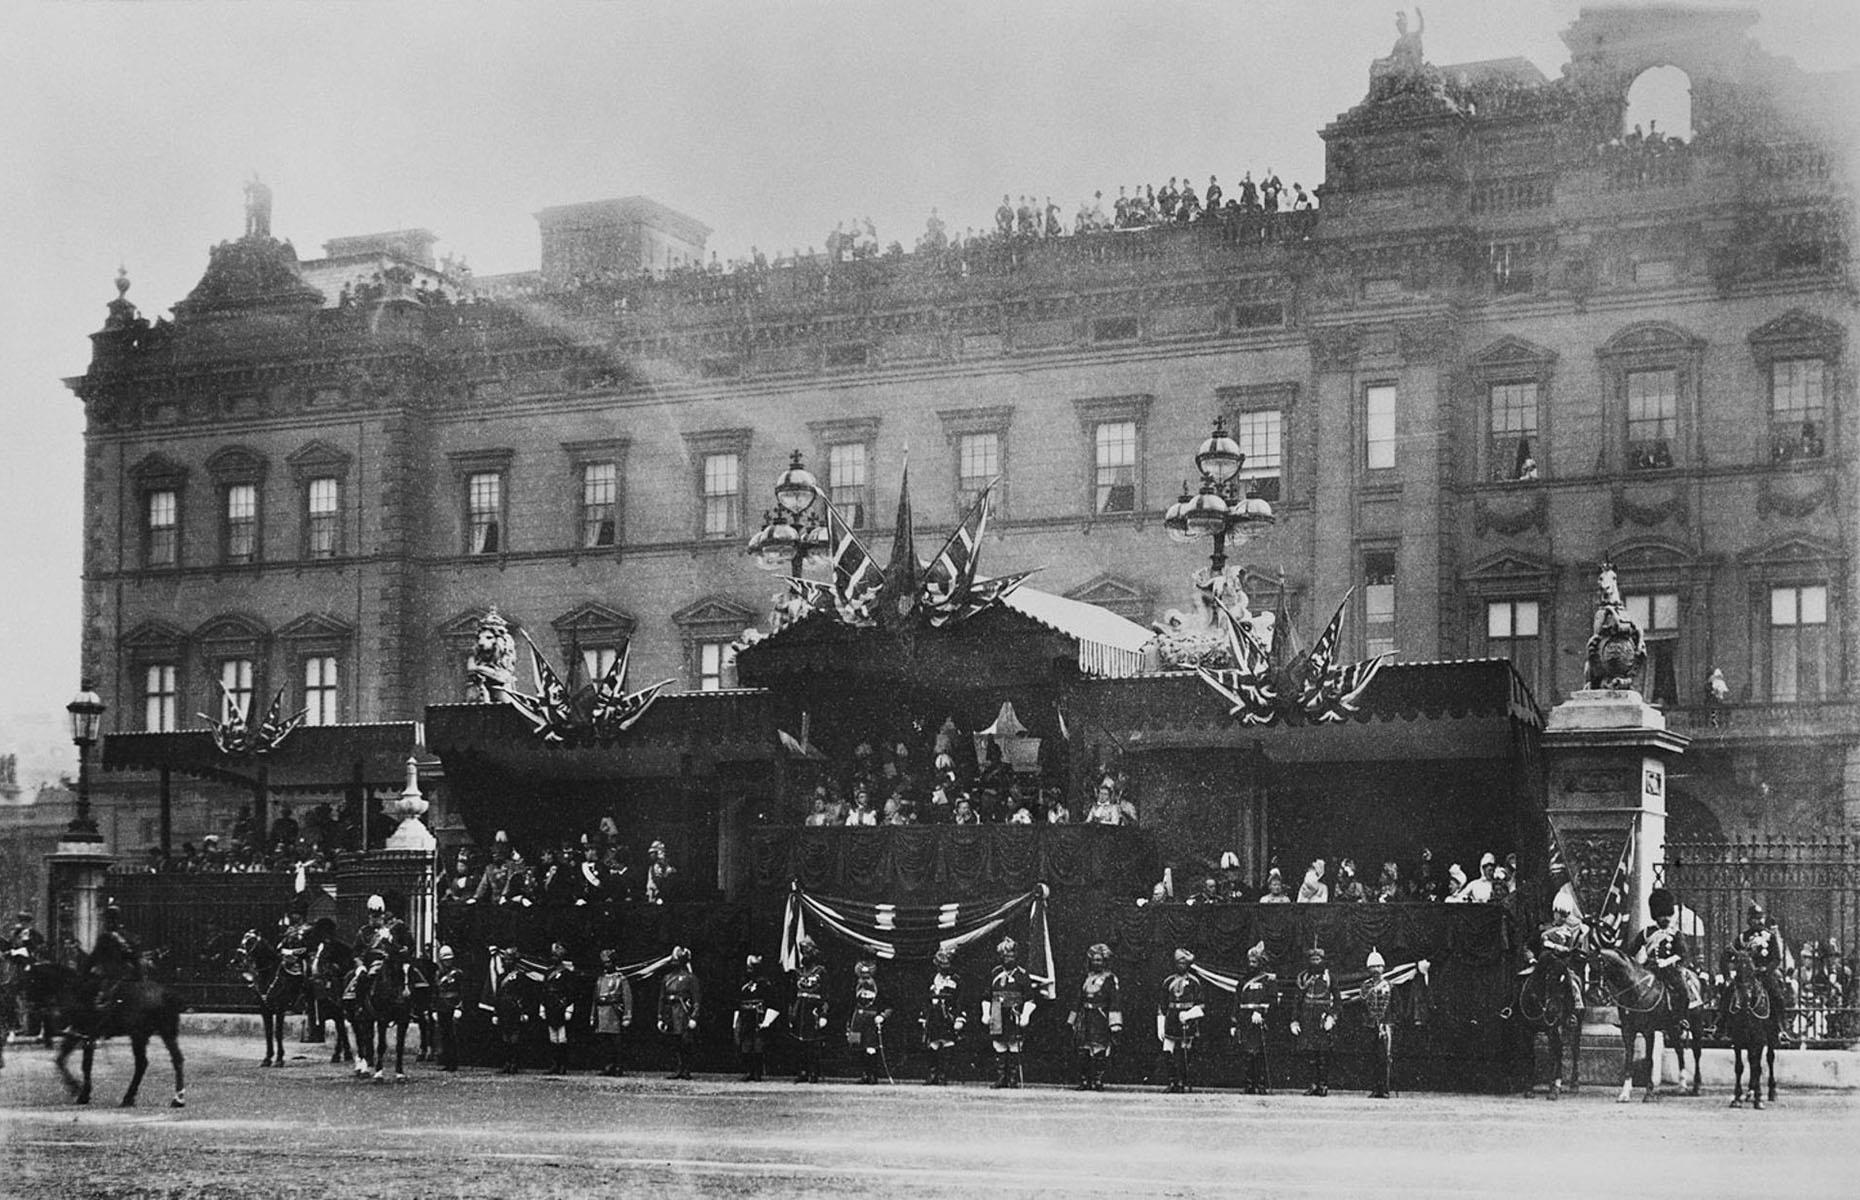 <p>No visit to London is complete without seeing Buckingham Palace. It has been the London residence of British monarchs since 1837 and the guards that protect it, wearing red uniforms and tall bearskin hats, are famous around the world. This photo shows Queen Victoria reviewing a parade during her Diamond Jubilee in 1897. The edifice appears darker than it is today; it was refaced in Portland stone in 1913 by Aston Webb to provide a fitting backdrop for the grand monument to Queen Victoria.</p>